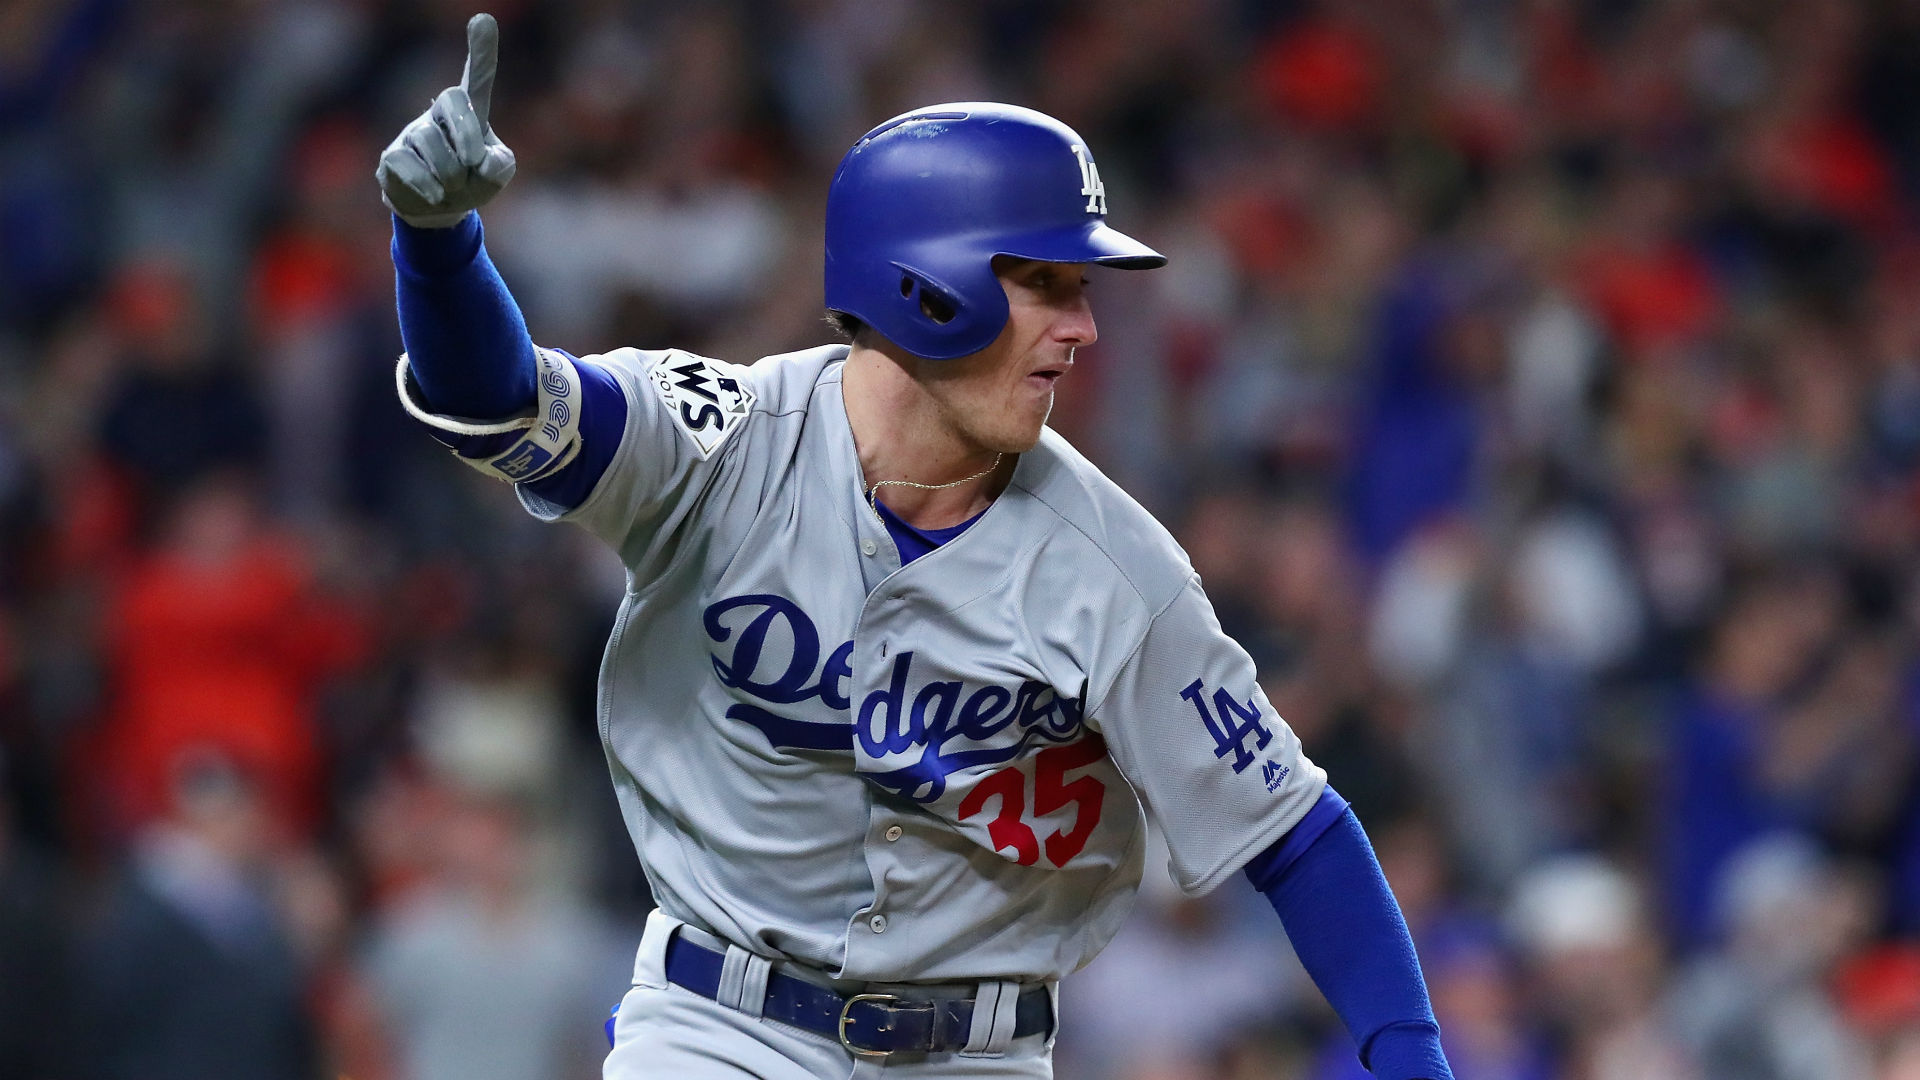 “I should be in the lineup every single day," Bellinger told The Athletic. "I don’t think there’s a question about that."